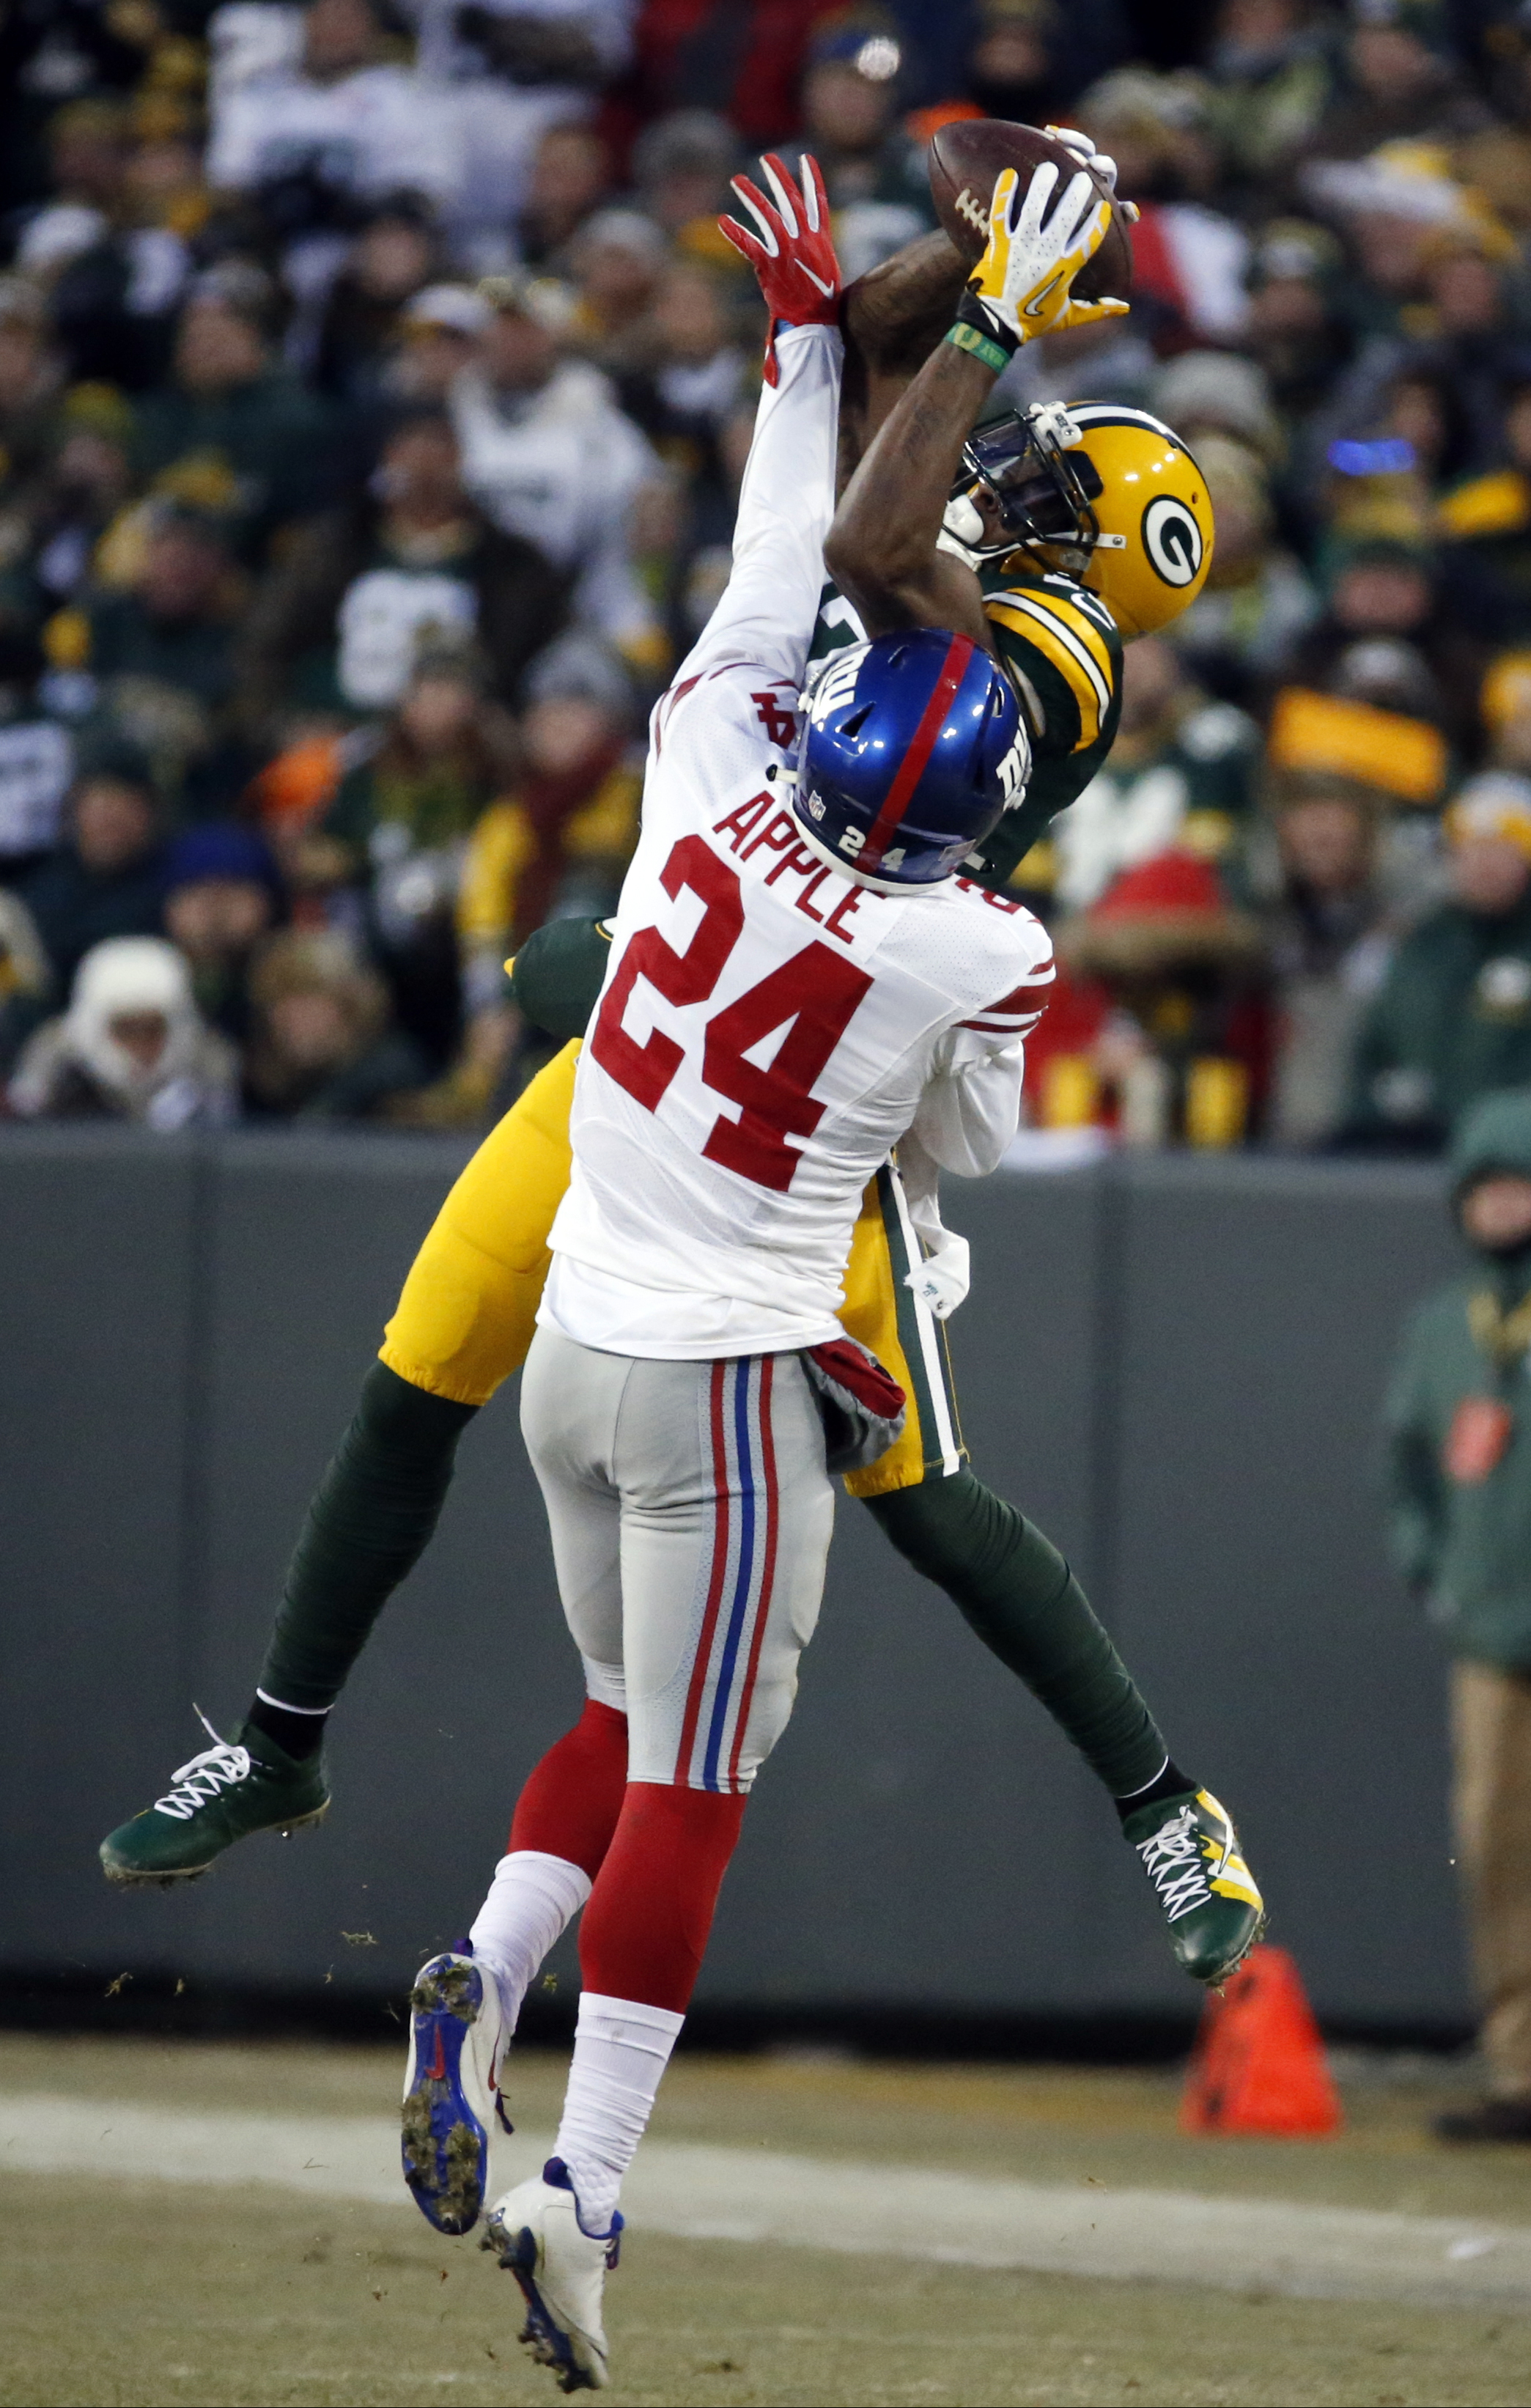 New York Giants cornerback Eli Apple (24) breaks up a pass intended for Green Bay Packers wide receiver Davante Adams (17) during the first half of an NFC wild-card NFL football game, Sunday, Jan. 8, 2017, in Green Bay, Wis. (AP Photo/Mike Roemer)